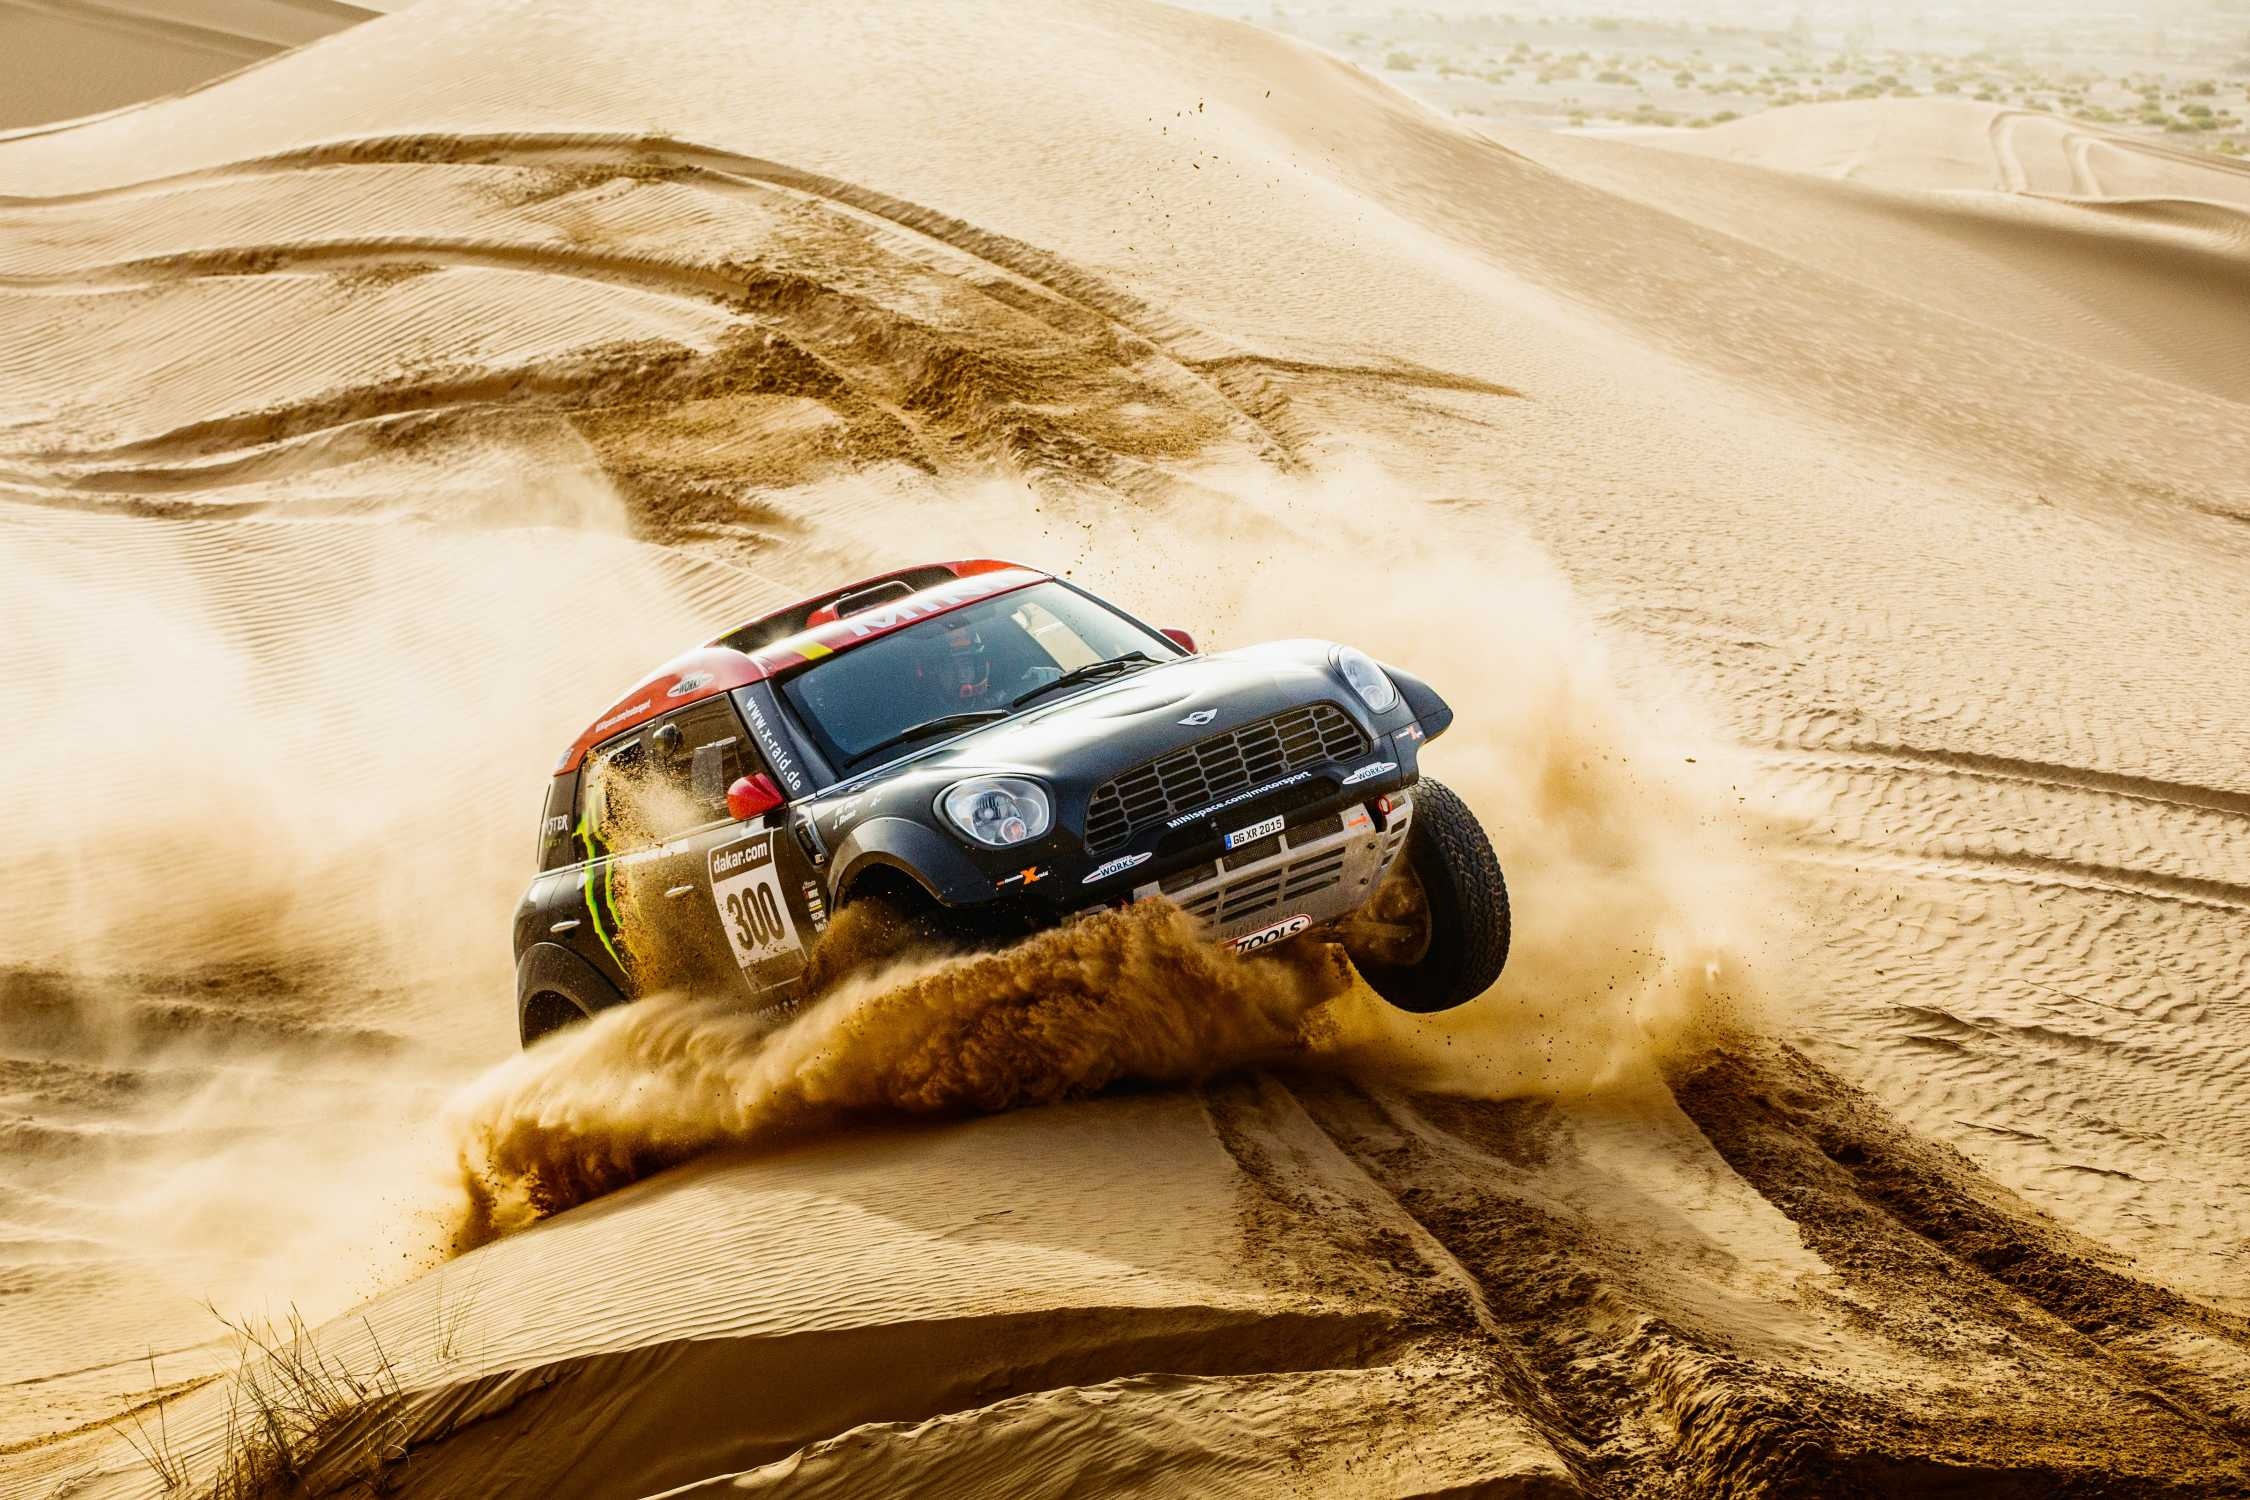 Rally Raid: MINI, 2015, Monster Energy, Four-Wheel Steering, Modern Engine Protection Against High Temperatures And Mechanical Damage. 2250x1500 HD Wallpaper.